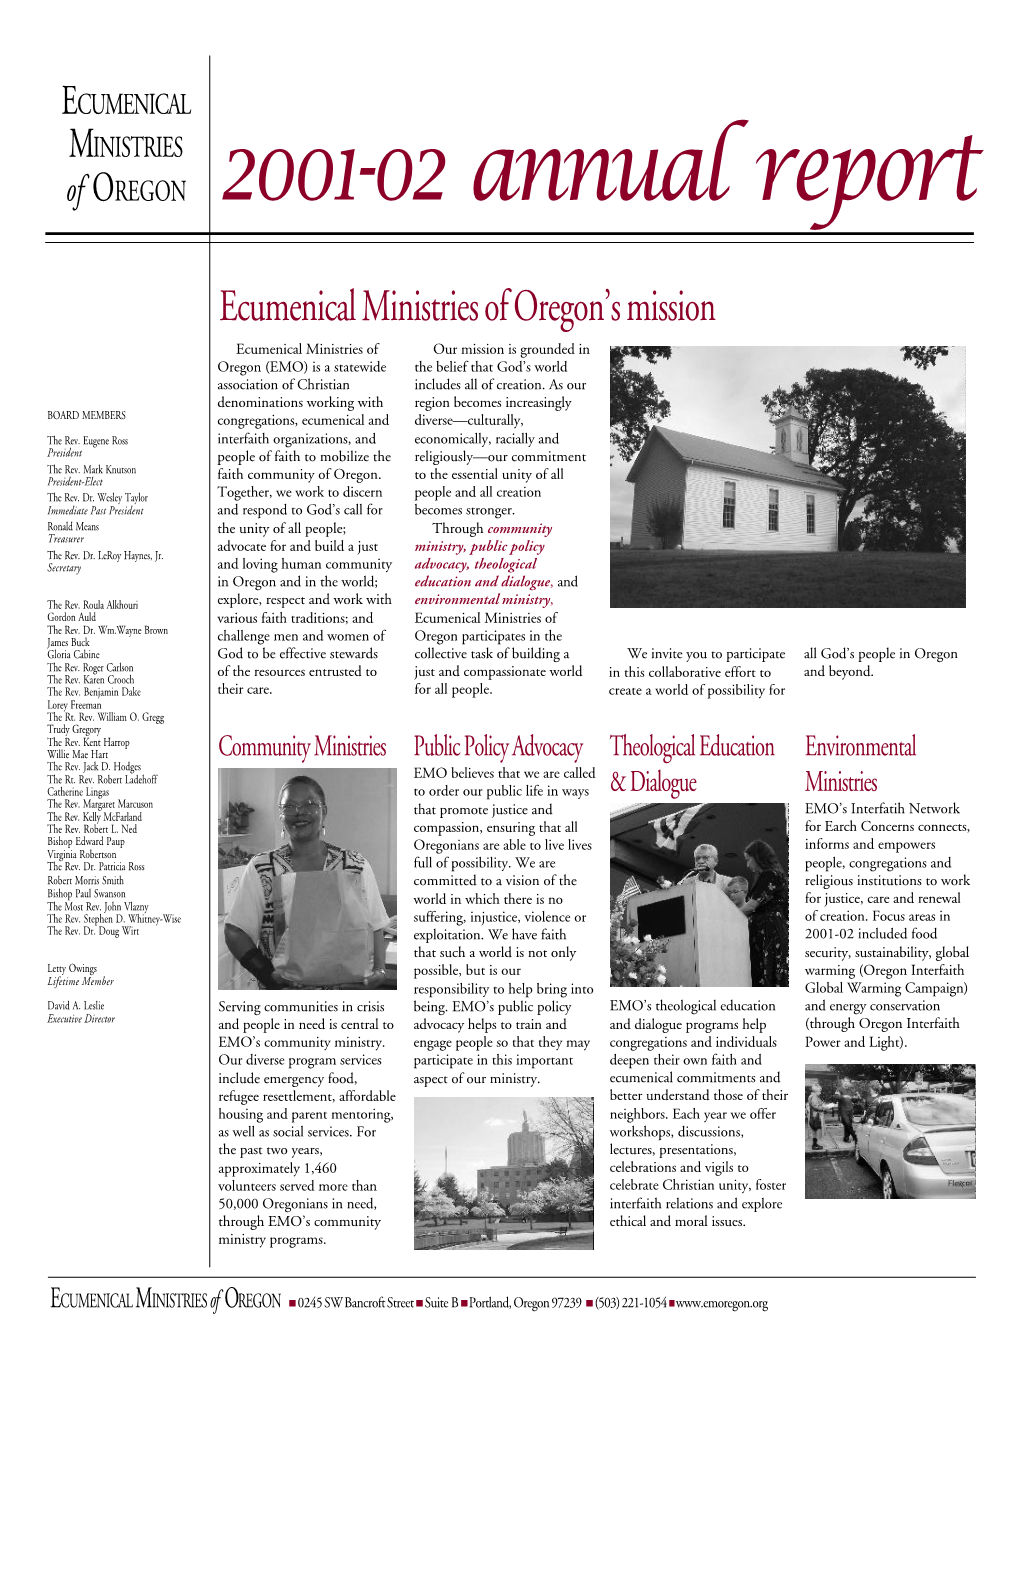 Ecumenical Ministries of Oregon's Mission